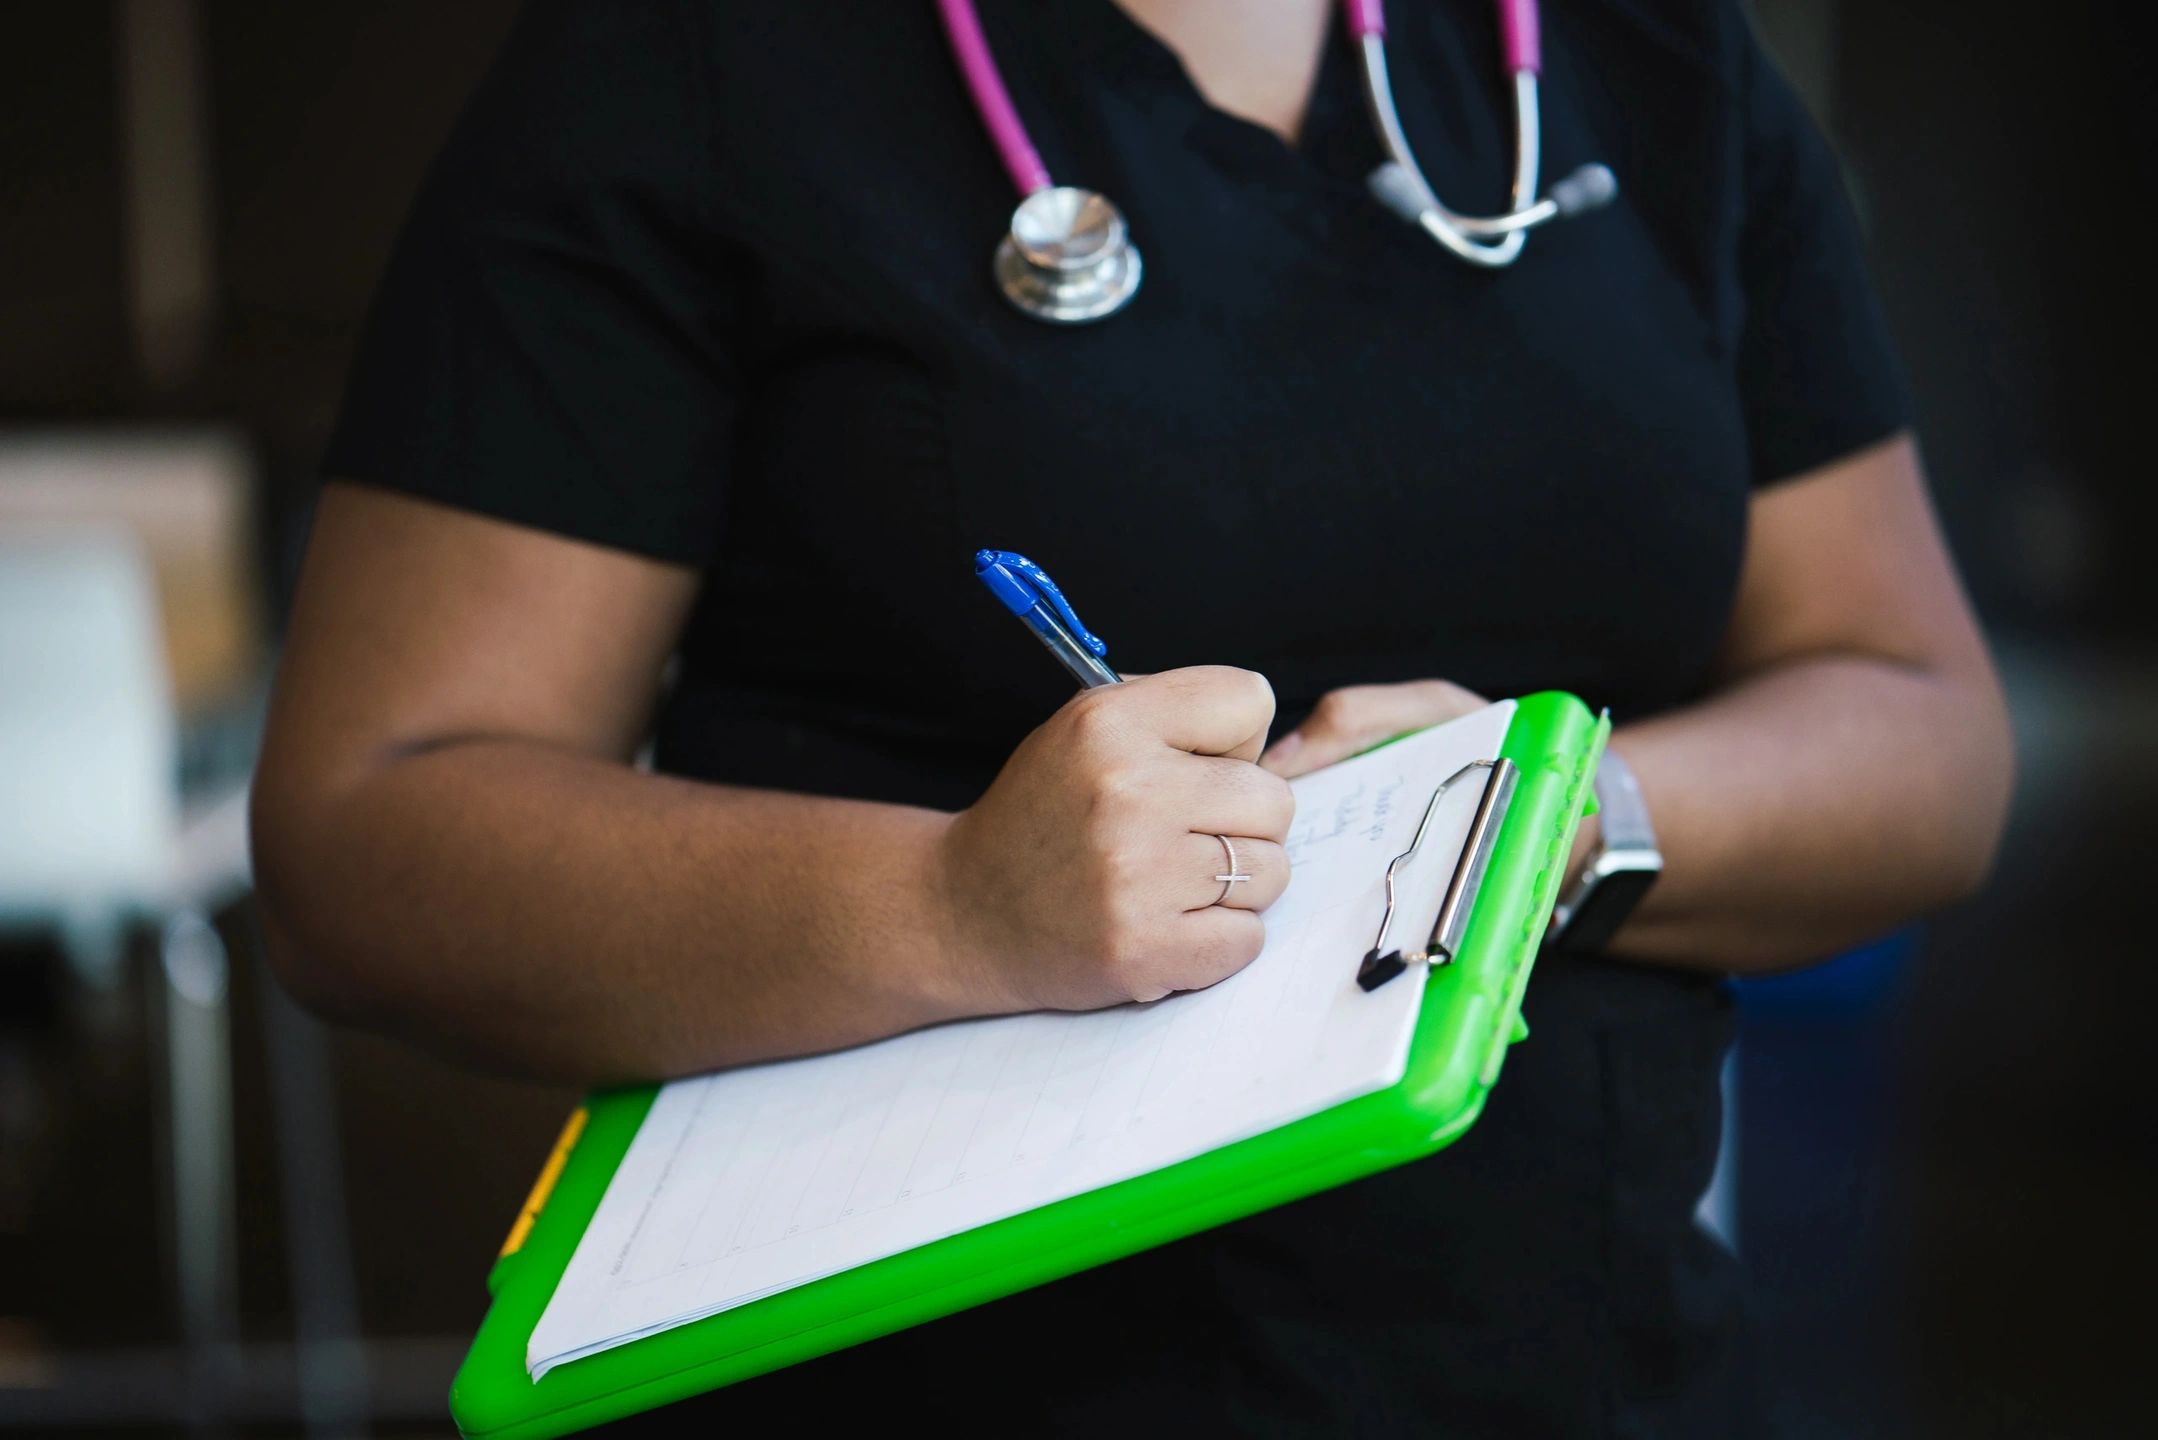 Healthcare Trends. Here is a description for the second image you uploaded: A healthcare professional, wearing a black uniform and a stethoscope around their neck, is seen writing on a clipboard with a bright green border. The person's face is not visible, focusing attention on the act of writing and the stethoscope. The blue pen in their hand contrasts with the green clipboard, suggesting a clinical setting. The background is slightly blurred, ensuring that the primary focus remains on the healthcare professional's hands and the clipboard.